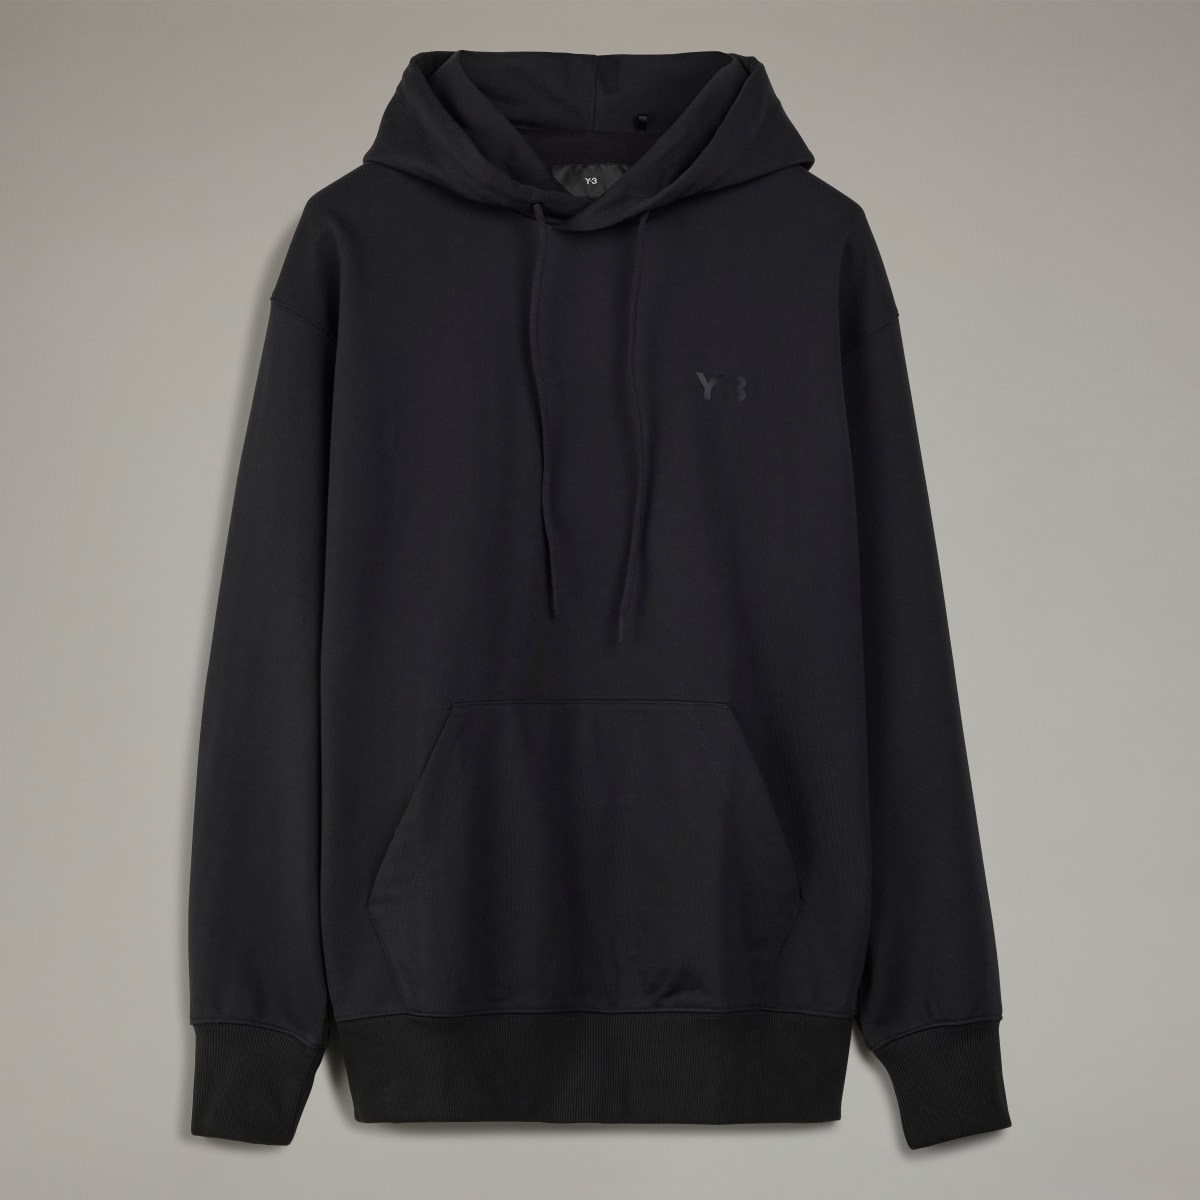 Adidas Y-3 French Terry Hoodie. 5